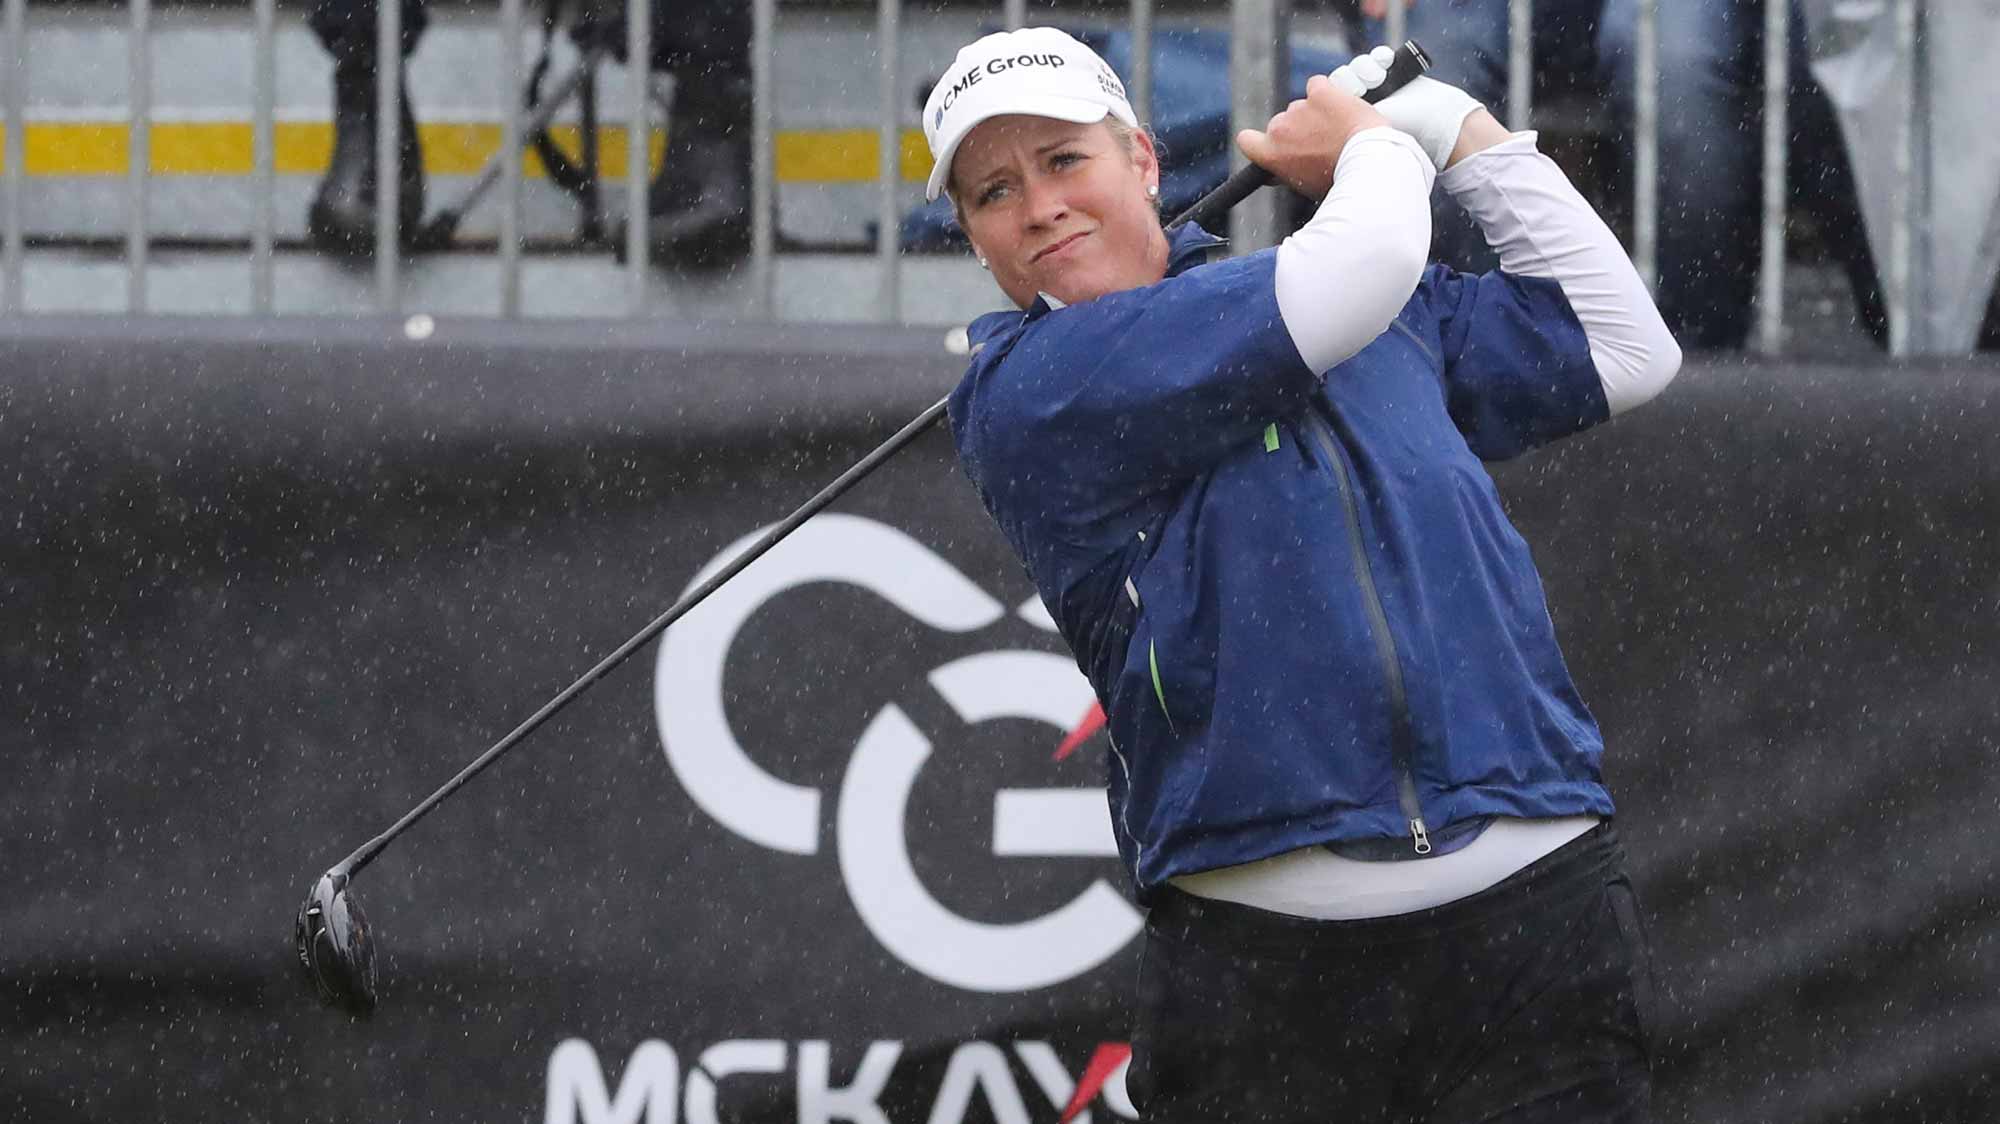 Brittany Lincicome Hits Her Tee Shot During The Final Round of the MCKAYSON New Zealand Women's Open